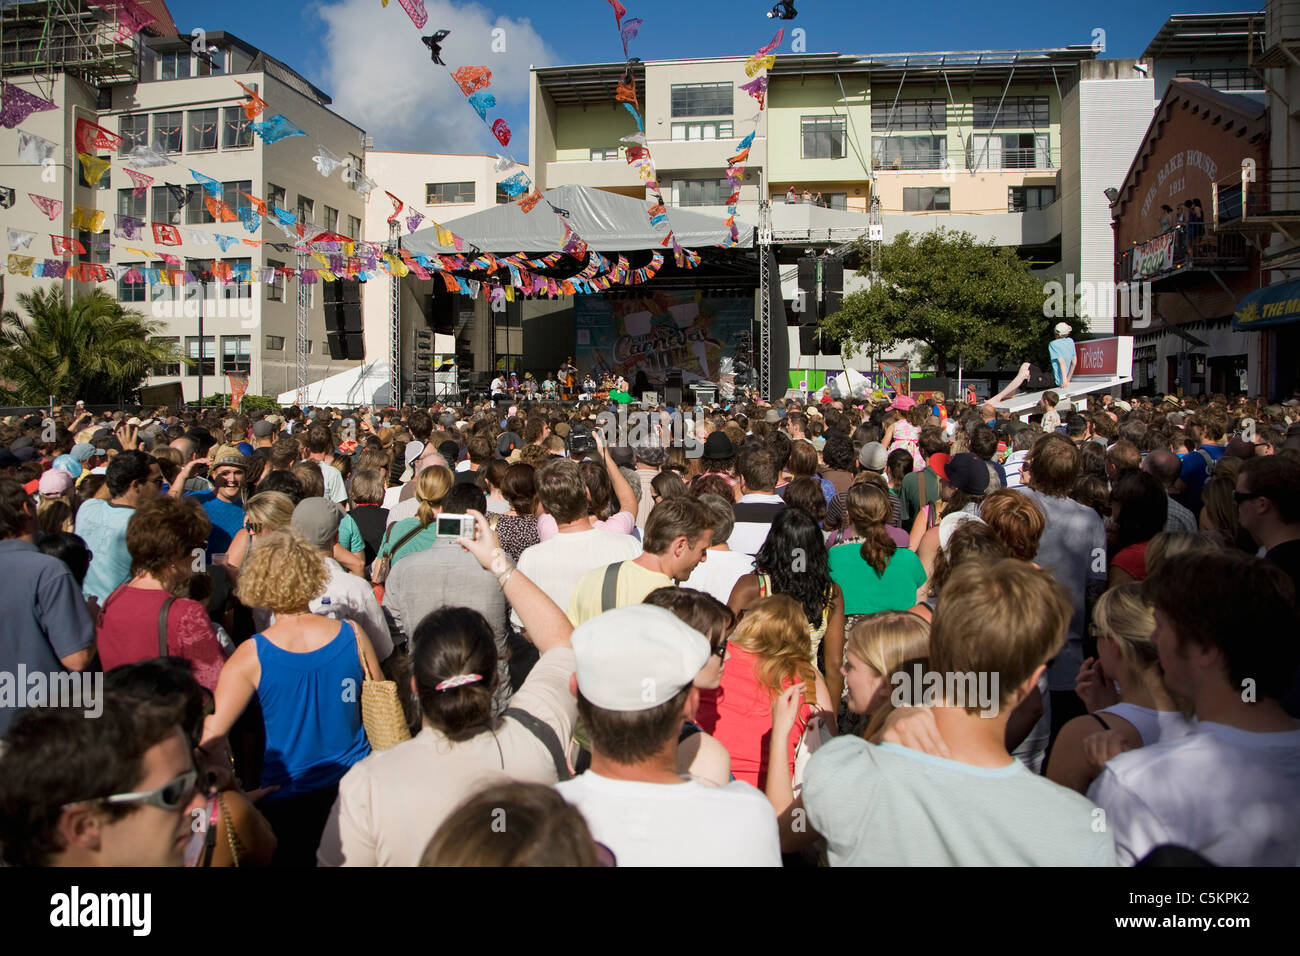 Crowd of people watching a band perform on an outdoor stage at a street fair, Cuba Street, Wellington, New Zealand Stock Photo